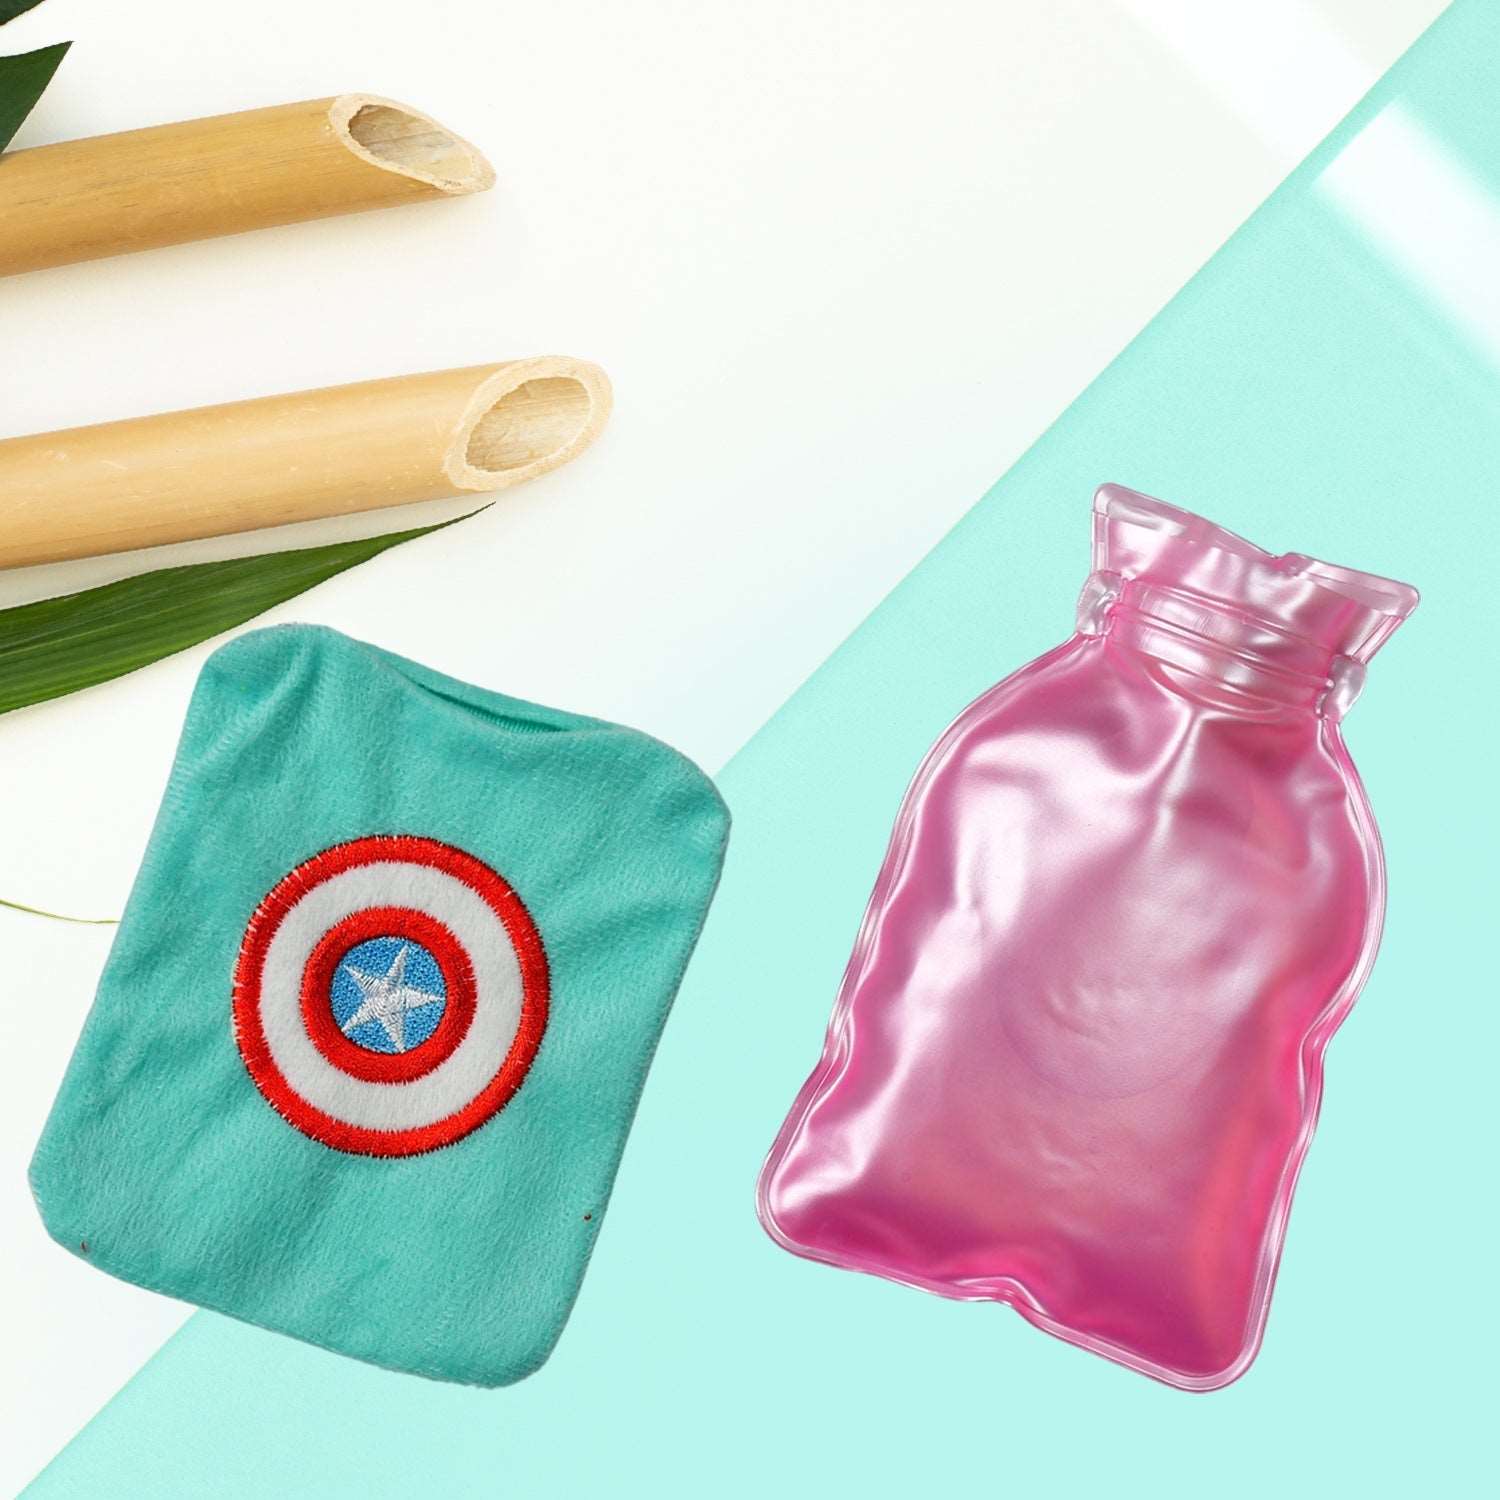 Captain America's Shield small Hot Water Bag with Cover for Pain Relief, Neck, Shoulder Pain and Hand, Feet Warmer, Menstrual Cramps